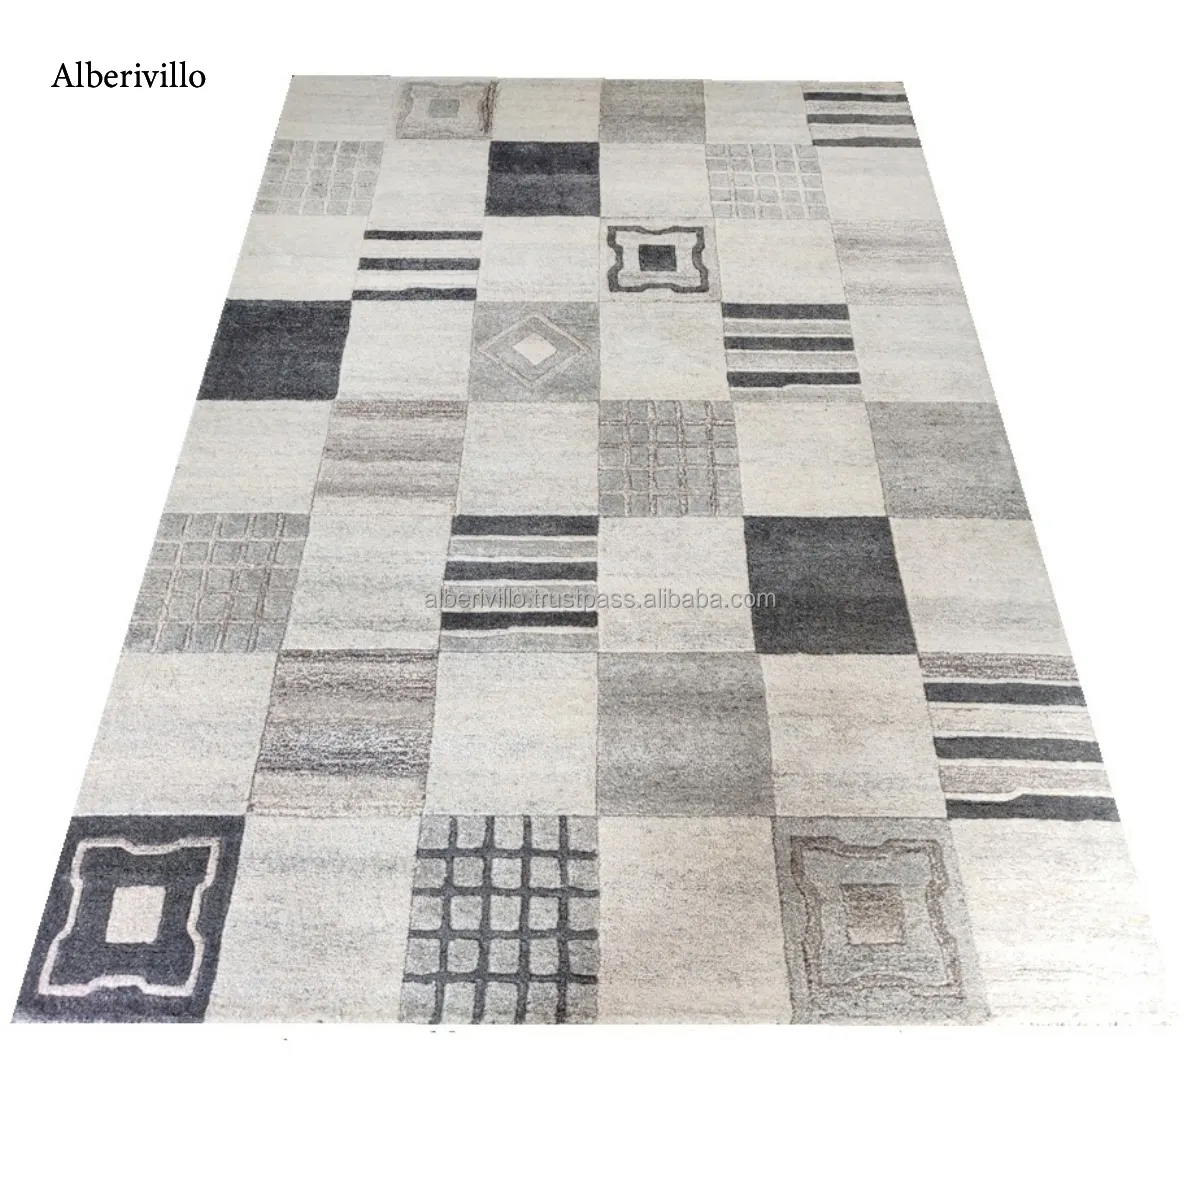 High Quality Wool Rug Carpet for Living Room Geometric Patterns Bed Room Cotton Hand Tufted Embroidered Area Rug